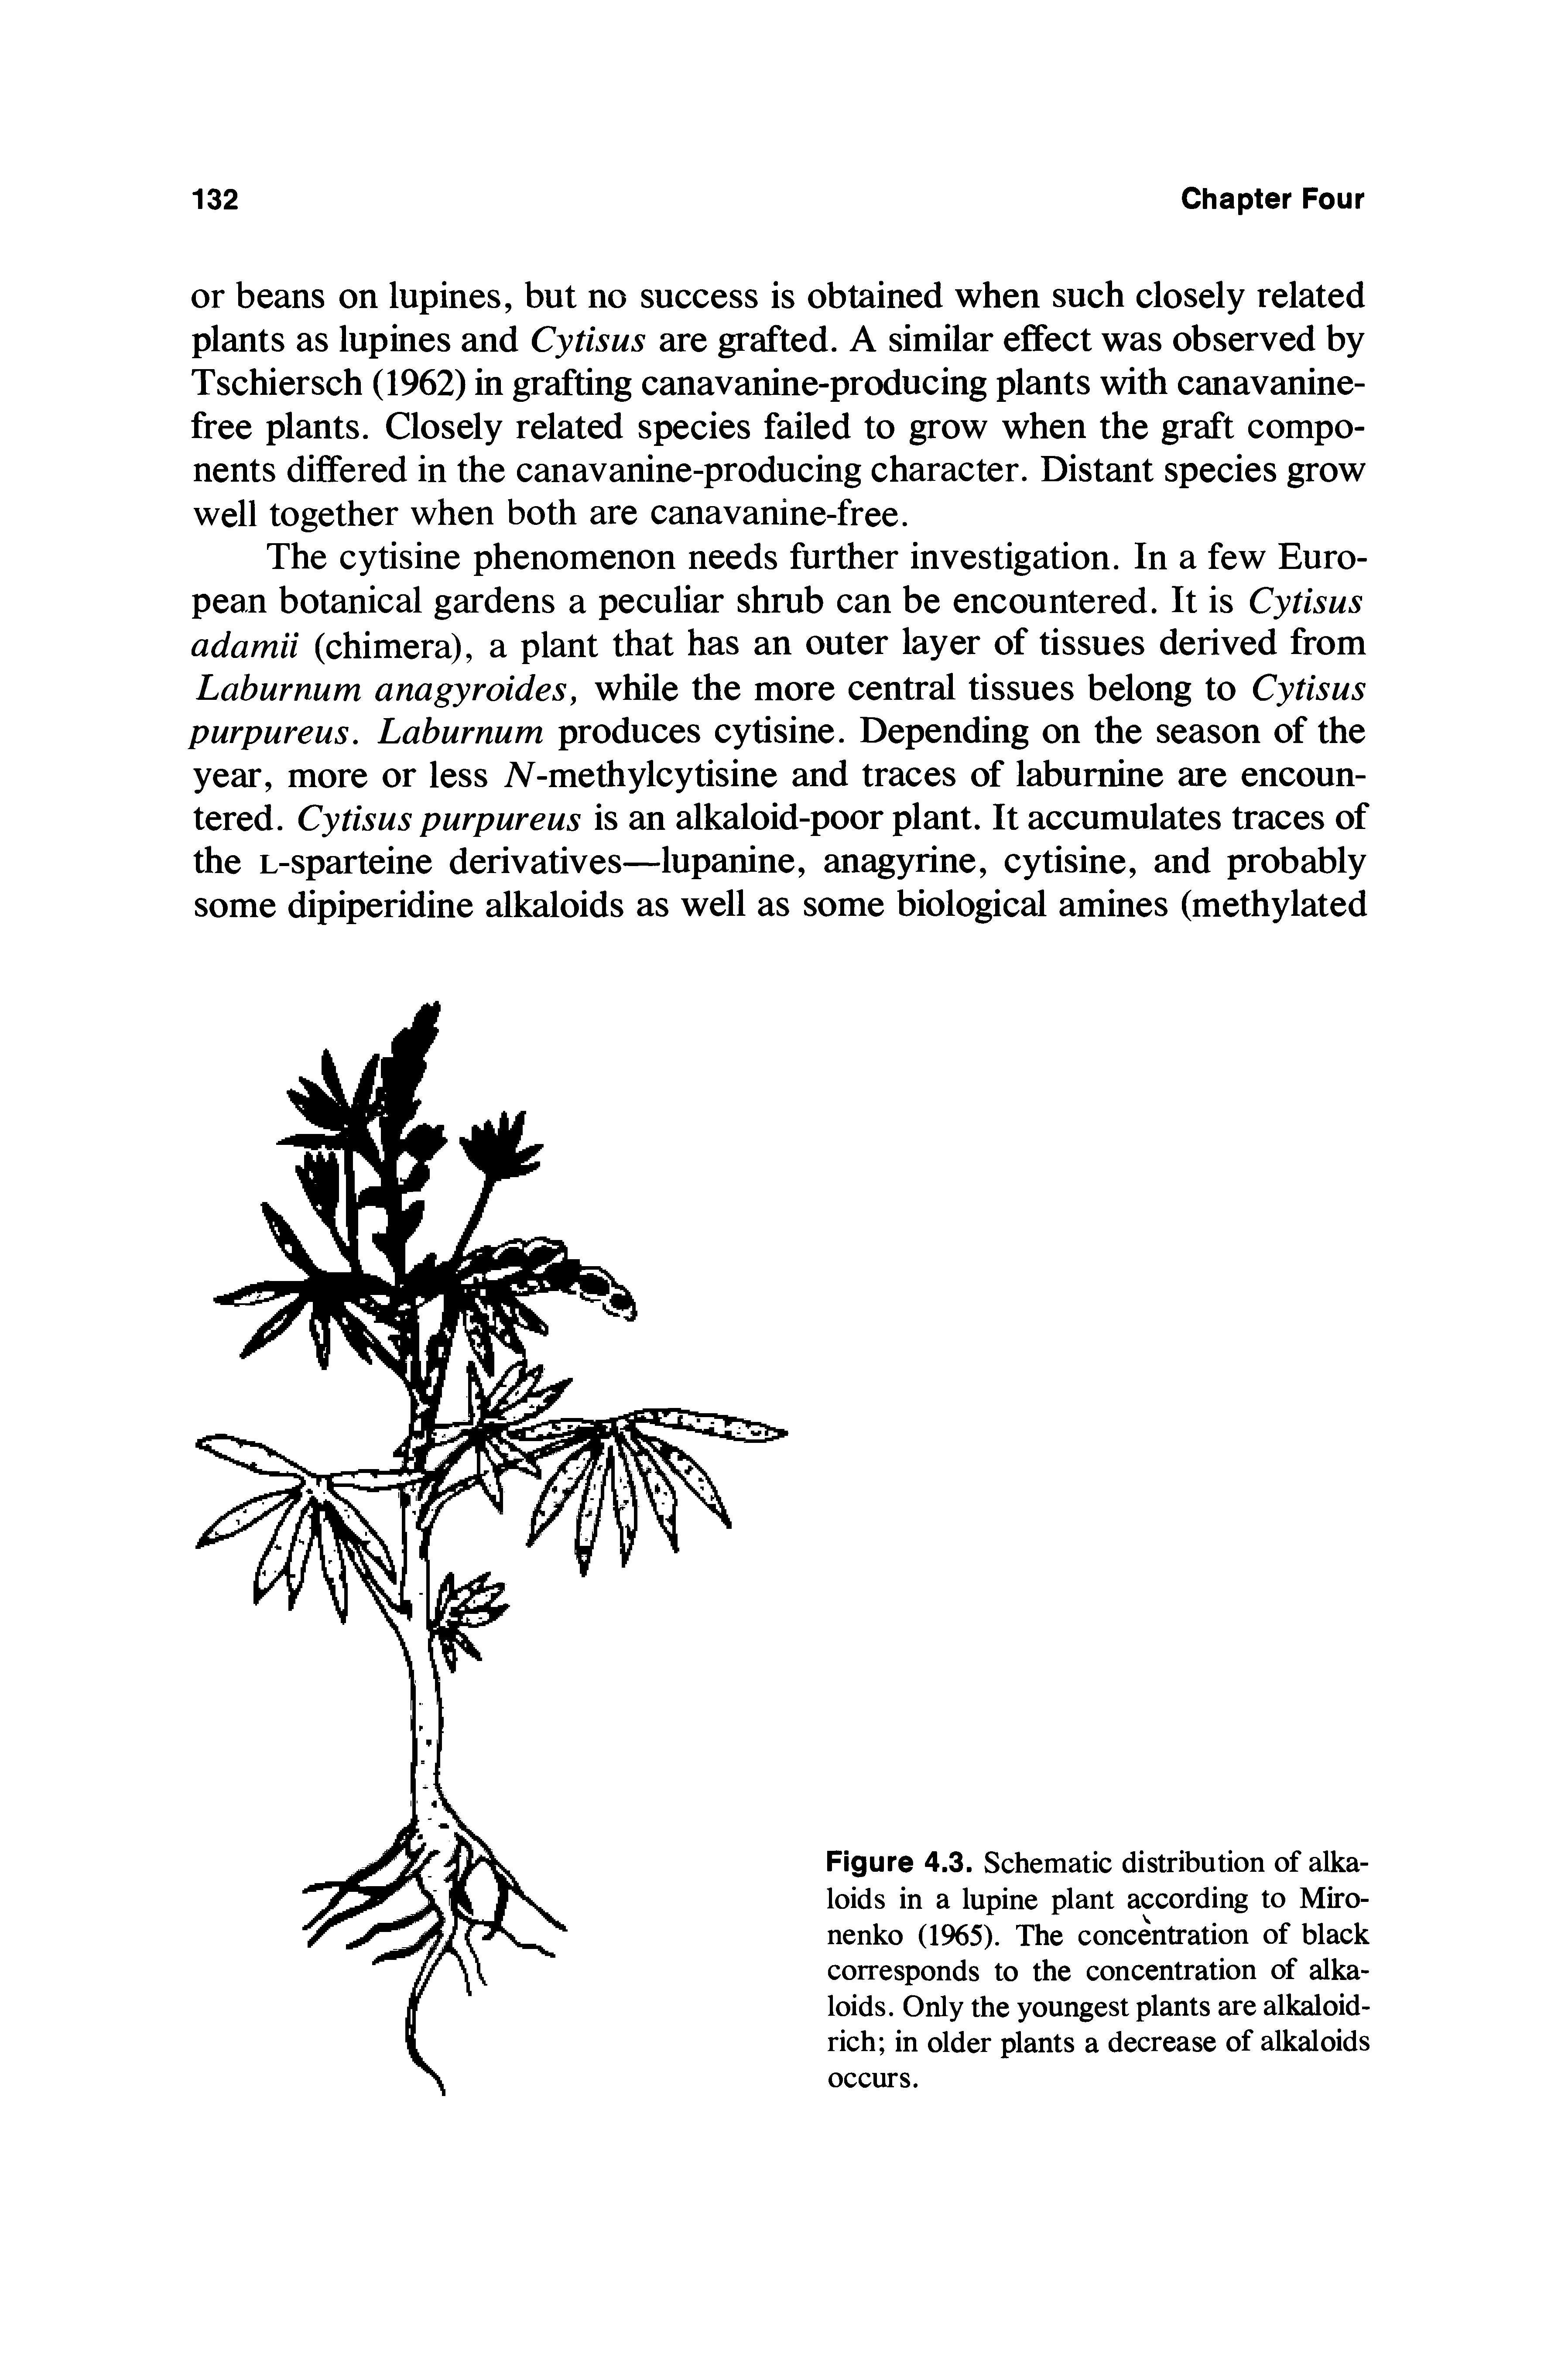 Figure 4.3. Schematic distribution of alkaloids in a lupine plant according to Miro-nenko (1965). The concentration of black corresponds to the concentration of alkaloids. Only the youngest plants are alkaloid-rich in older plants a decrease of alkaloids occurs.